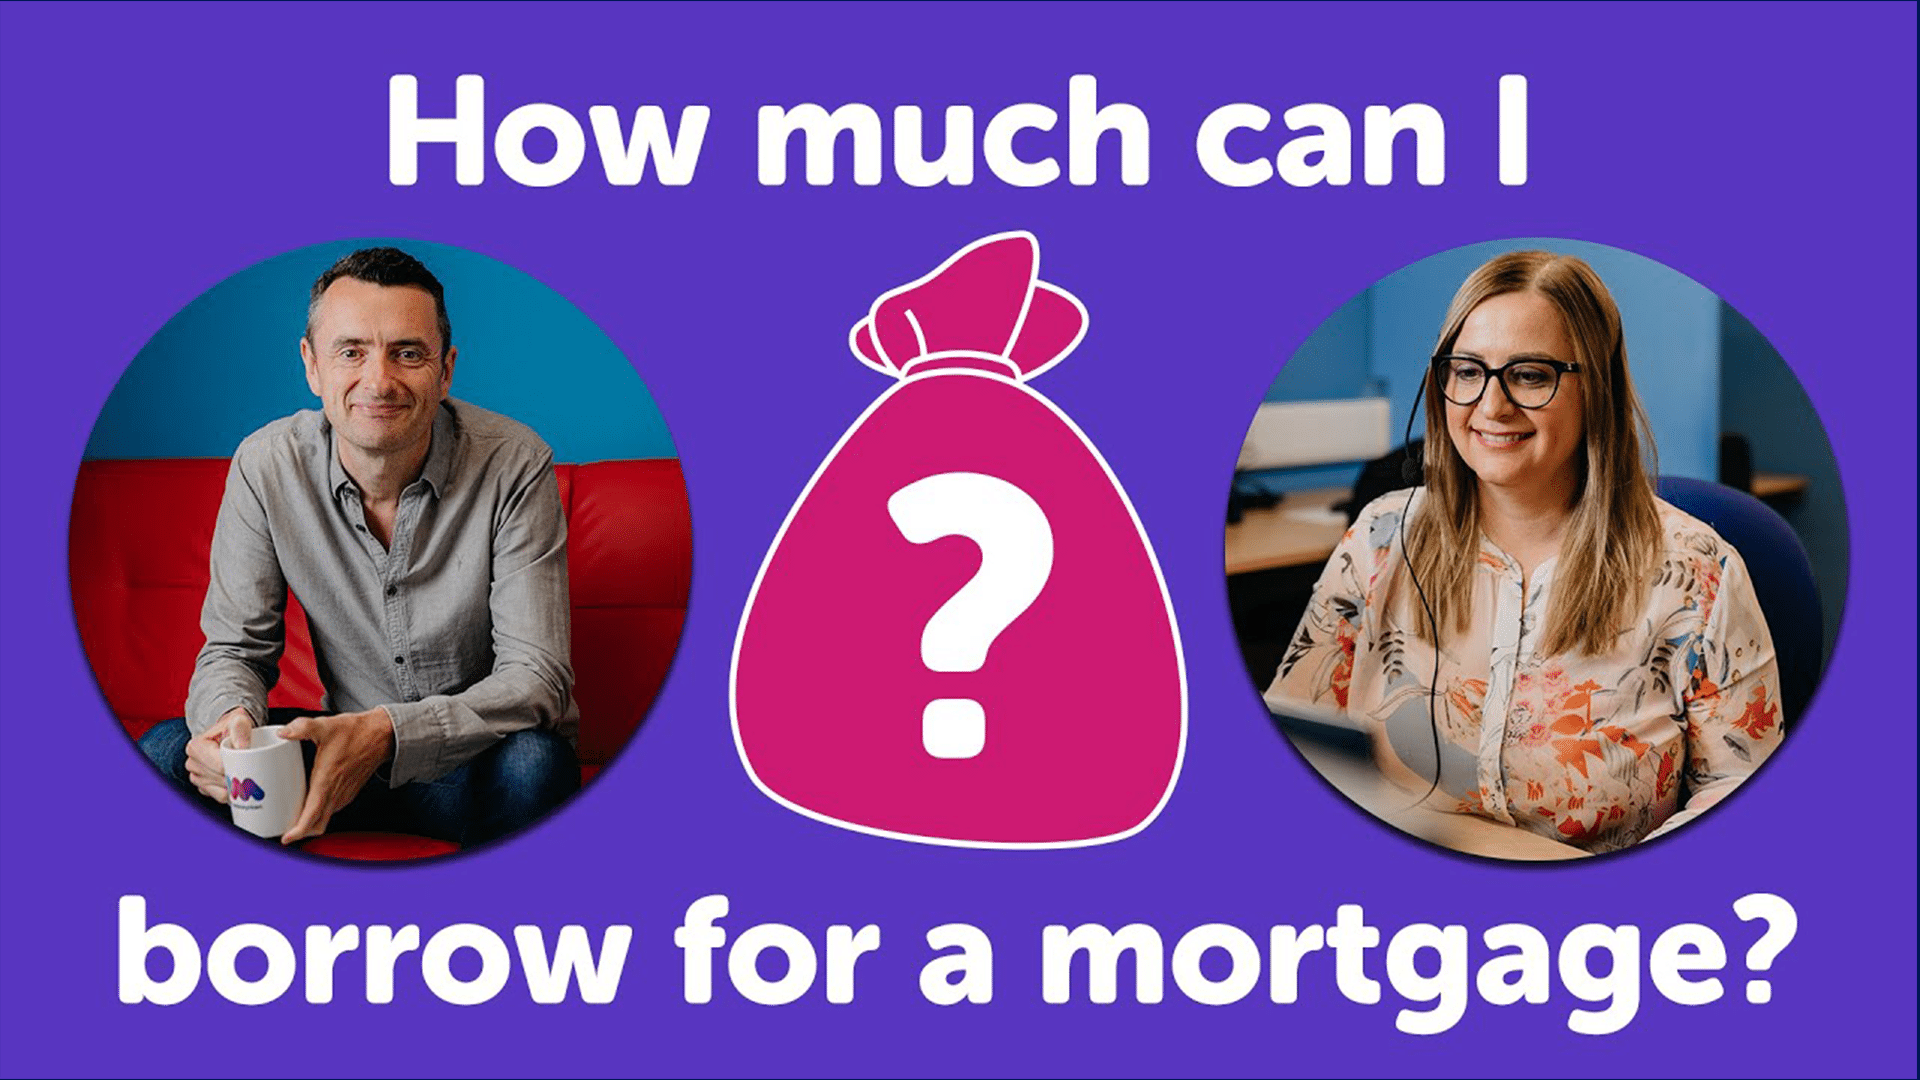 How Much Deposit Will I Need For A Mortgage?